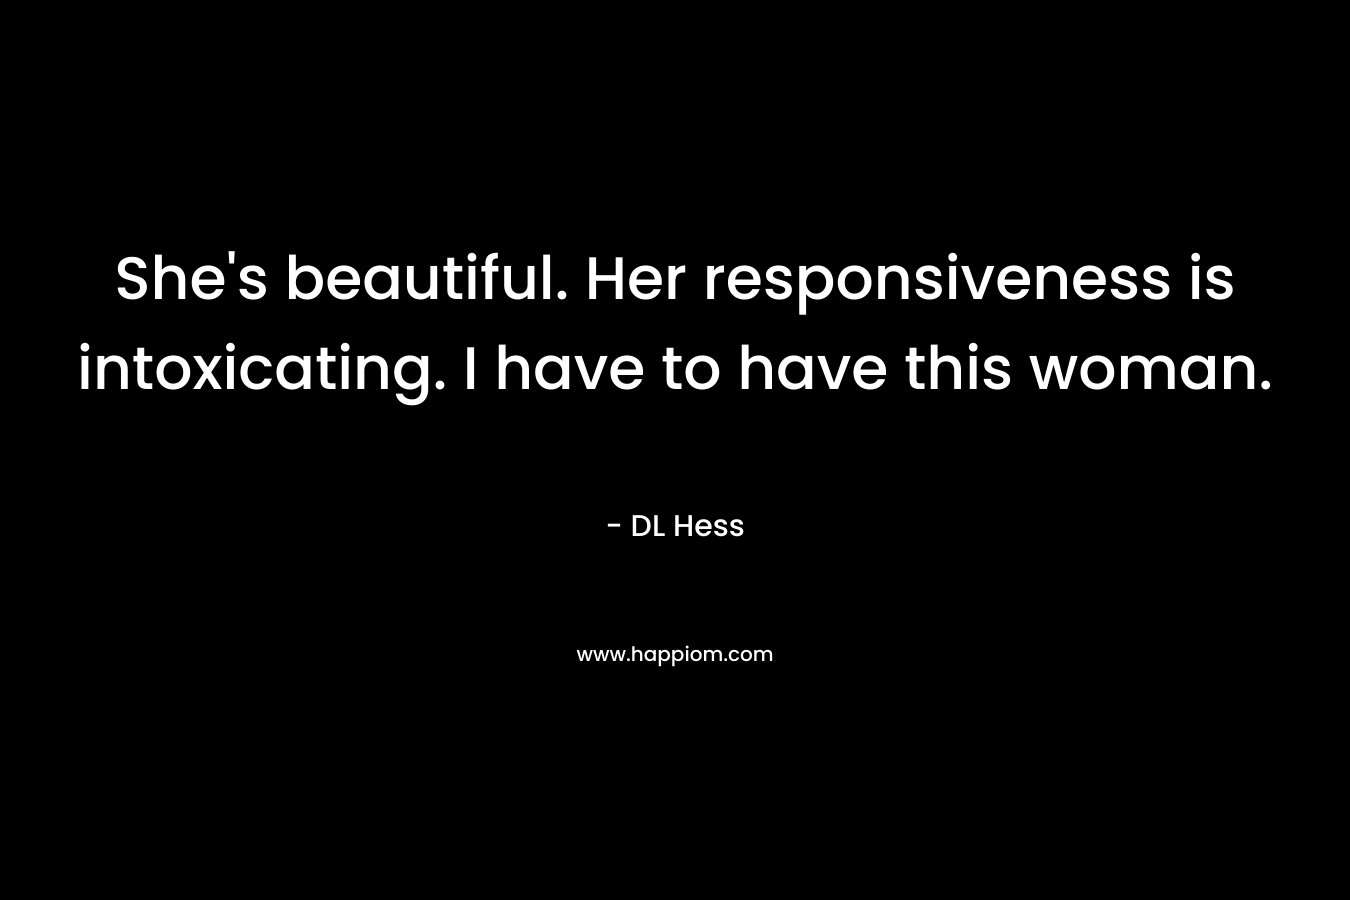 She’s beautiful. Her responsiveness is intoxicating. I have to have this woman. – DL Hess